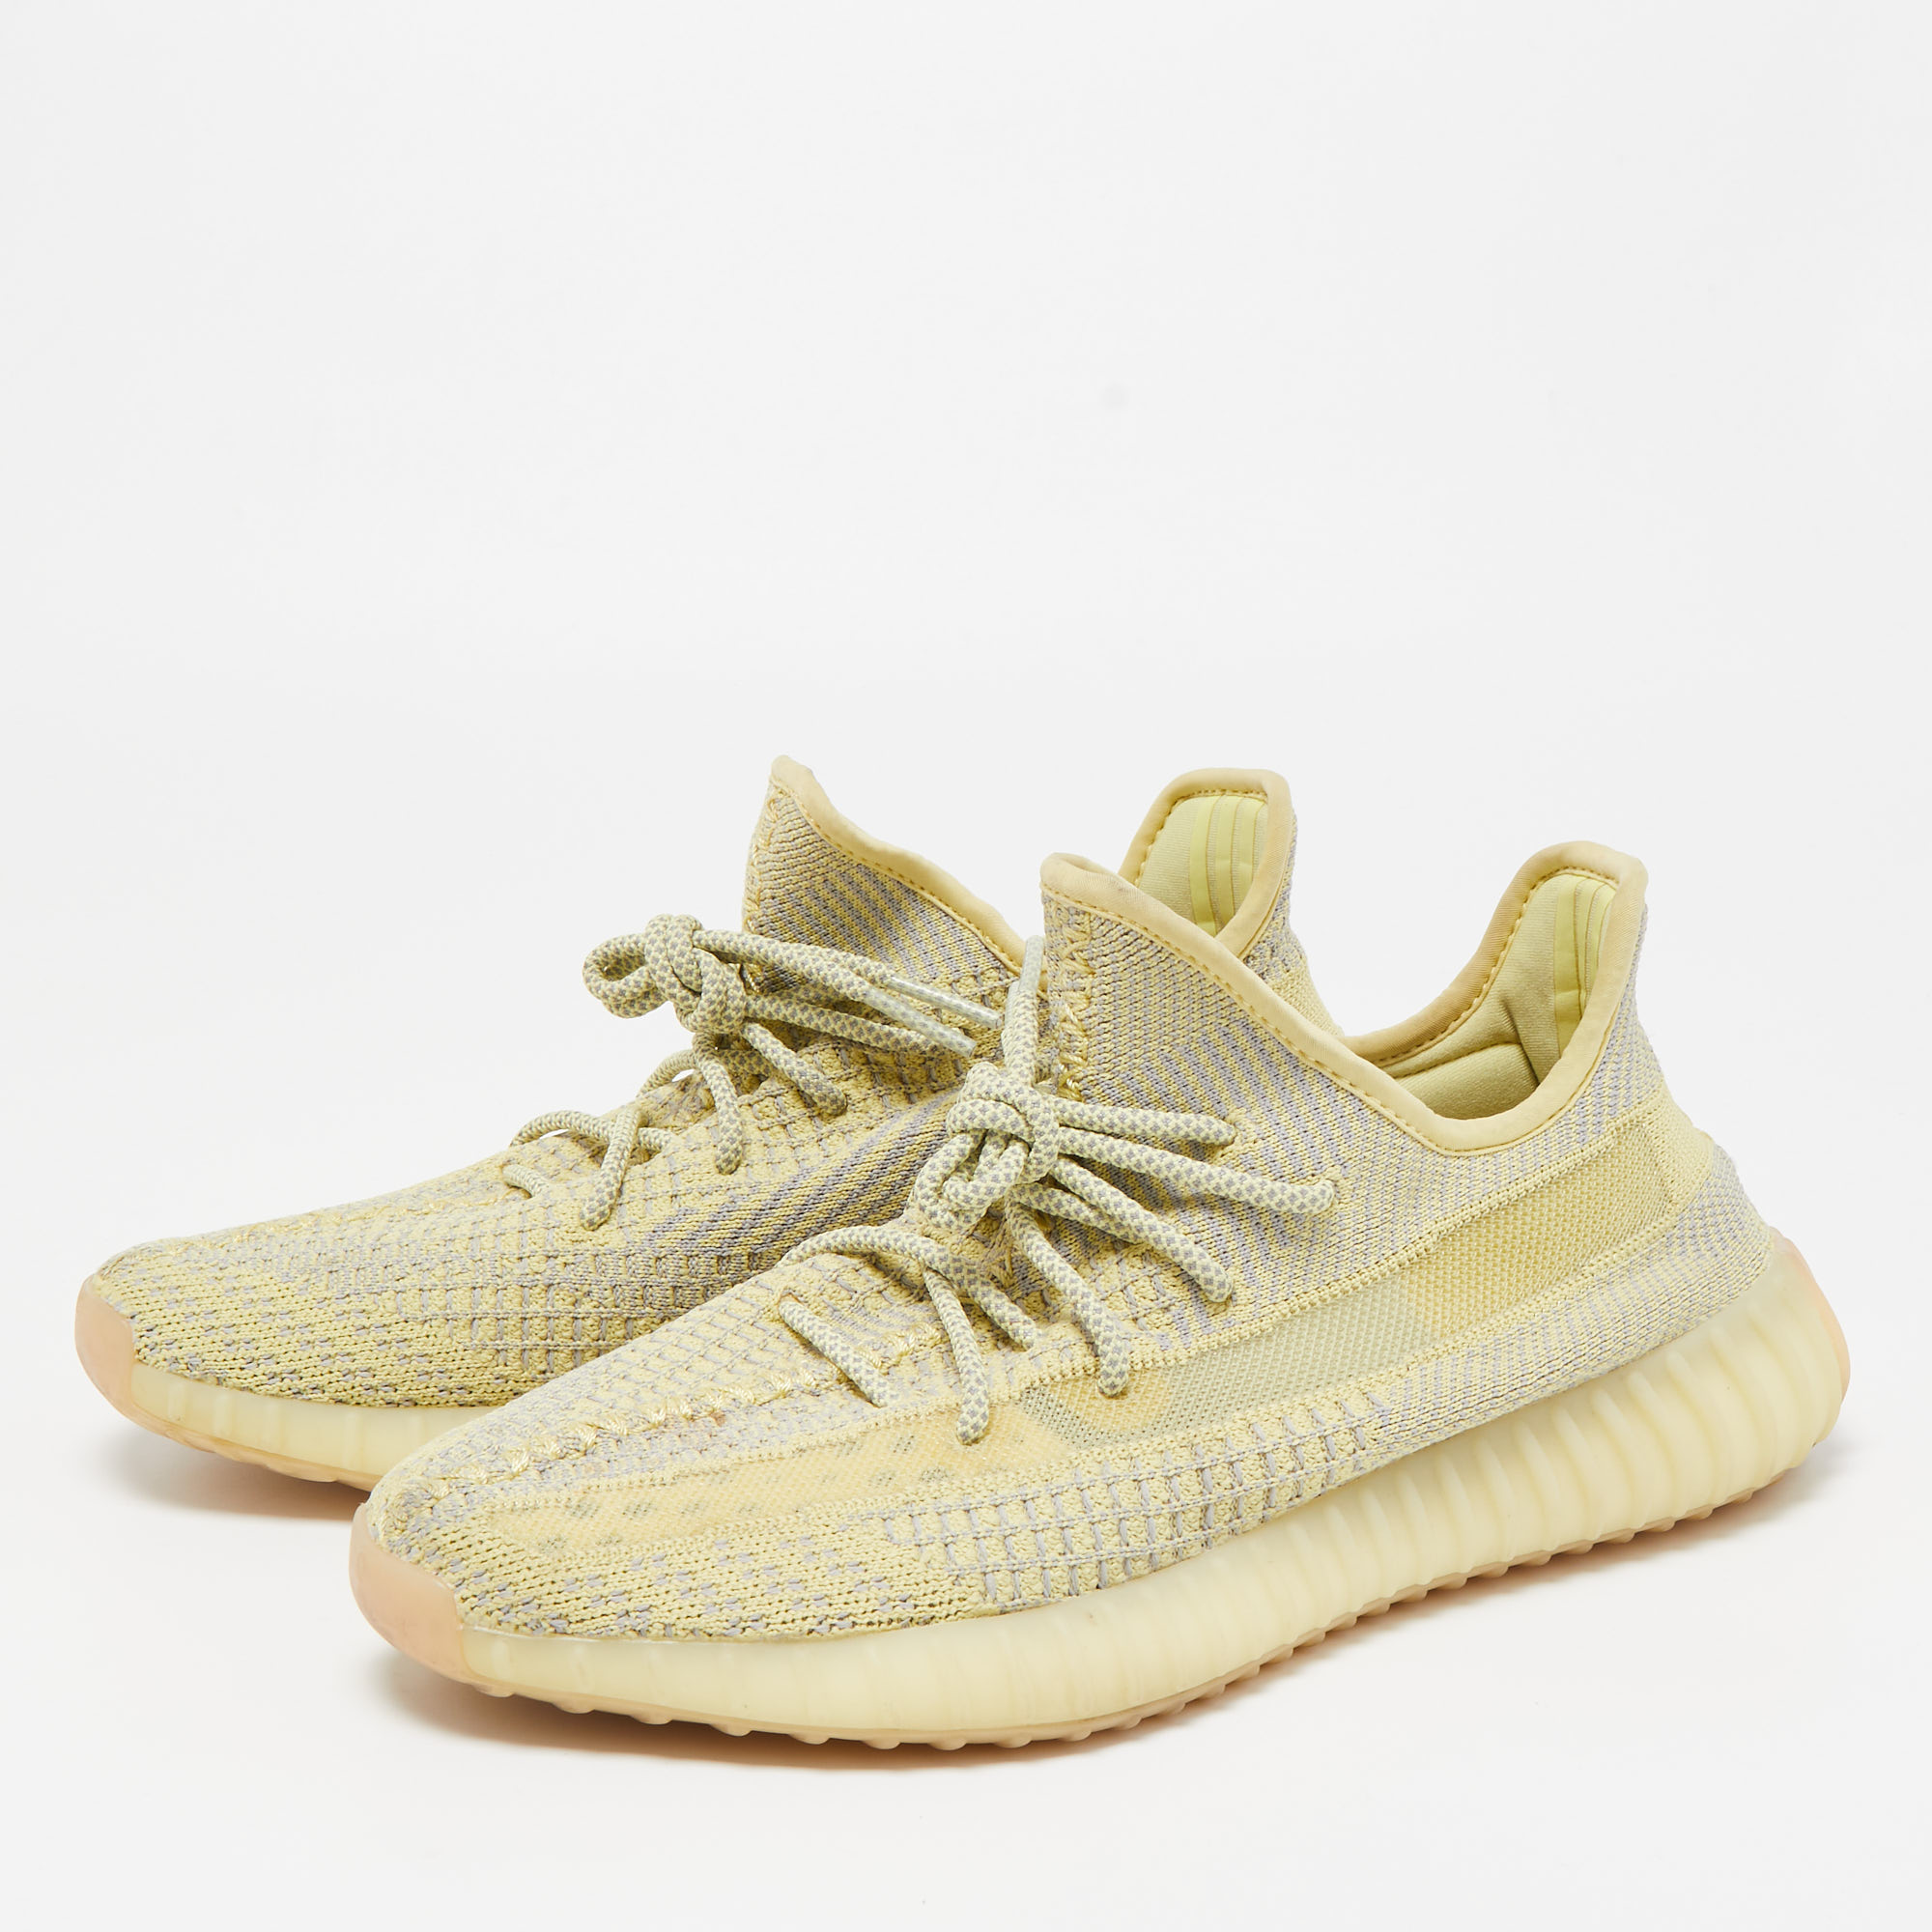 

Yeezy x Adidas Two Tone Knit Fabric Boost 350 V2 Antlia Sneakers Size, Green